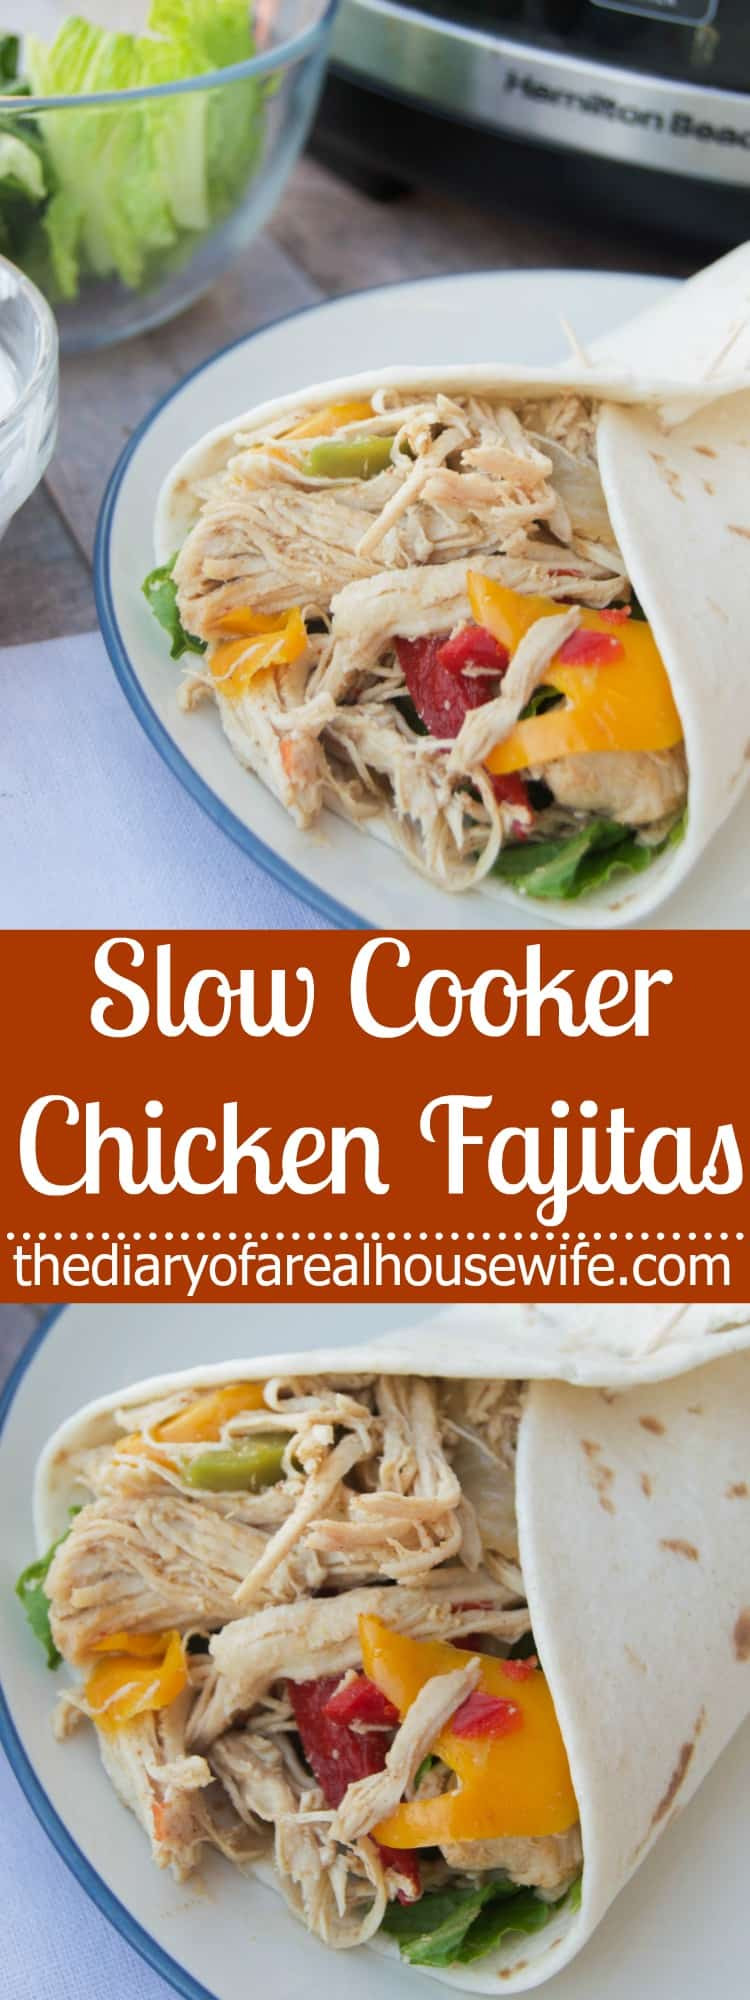 Slow Cooker Fajitas
 Slow Cooker Chicken Fajitas The Diary of a Real Housewife